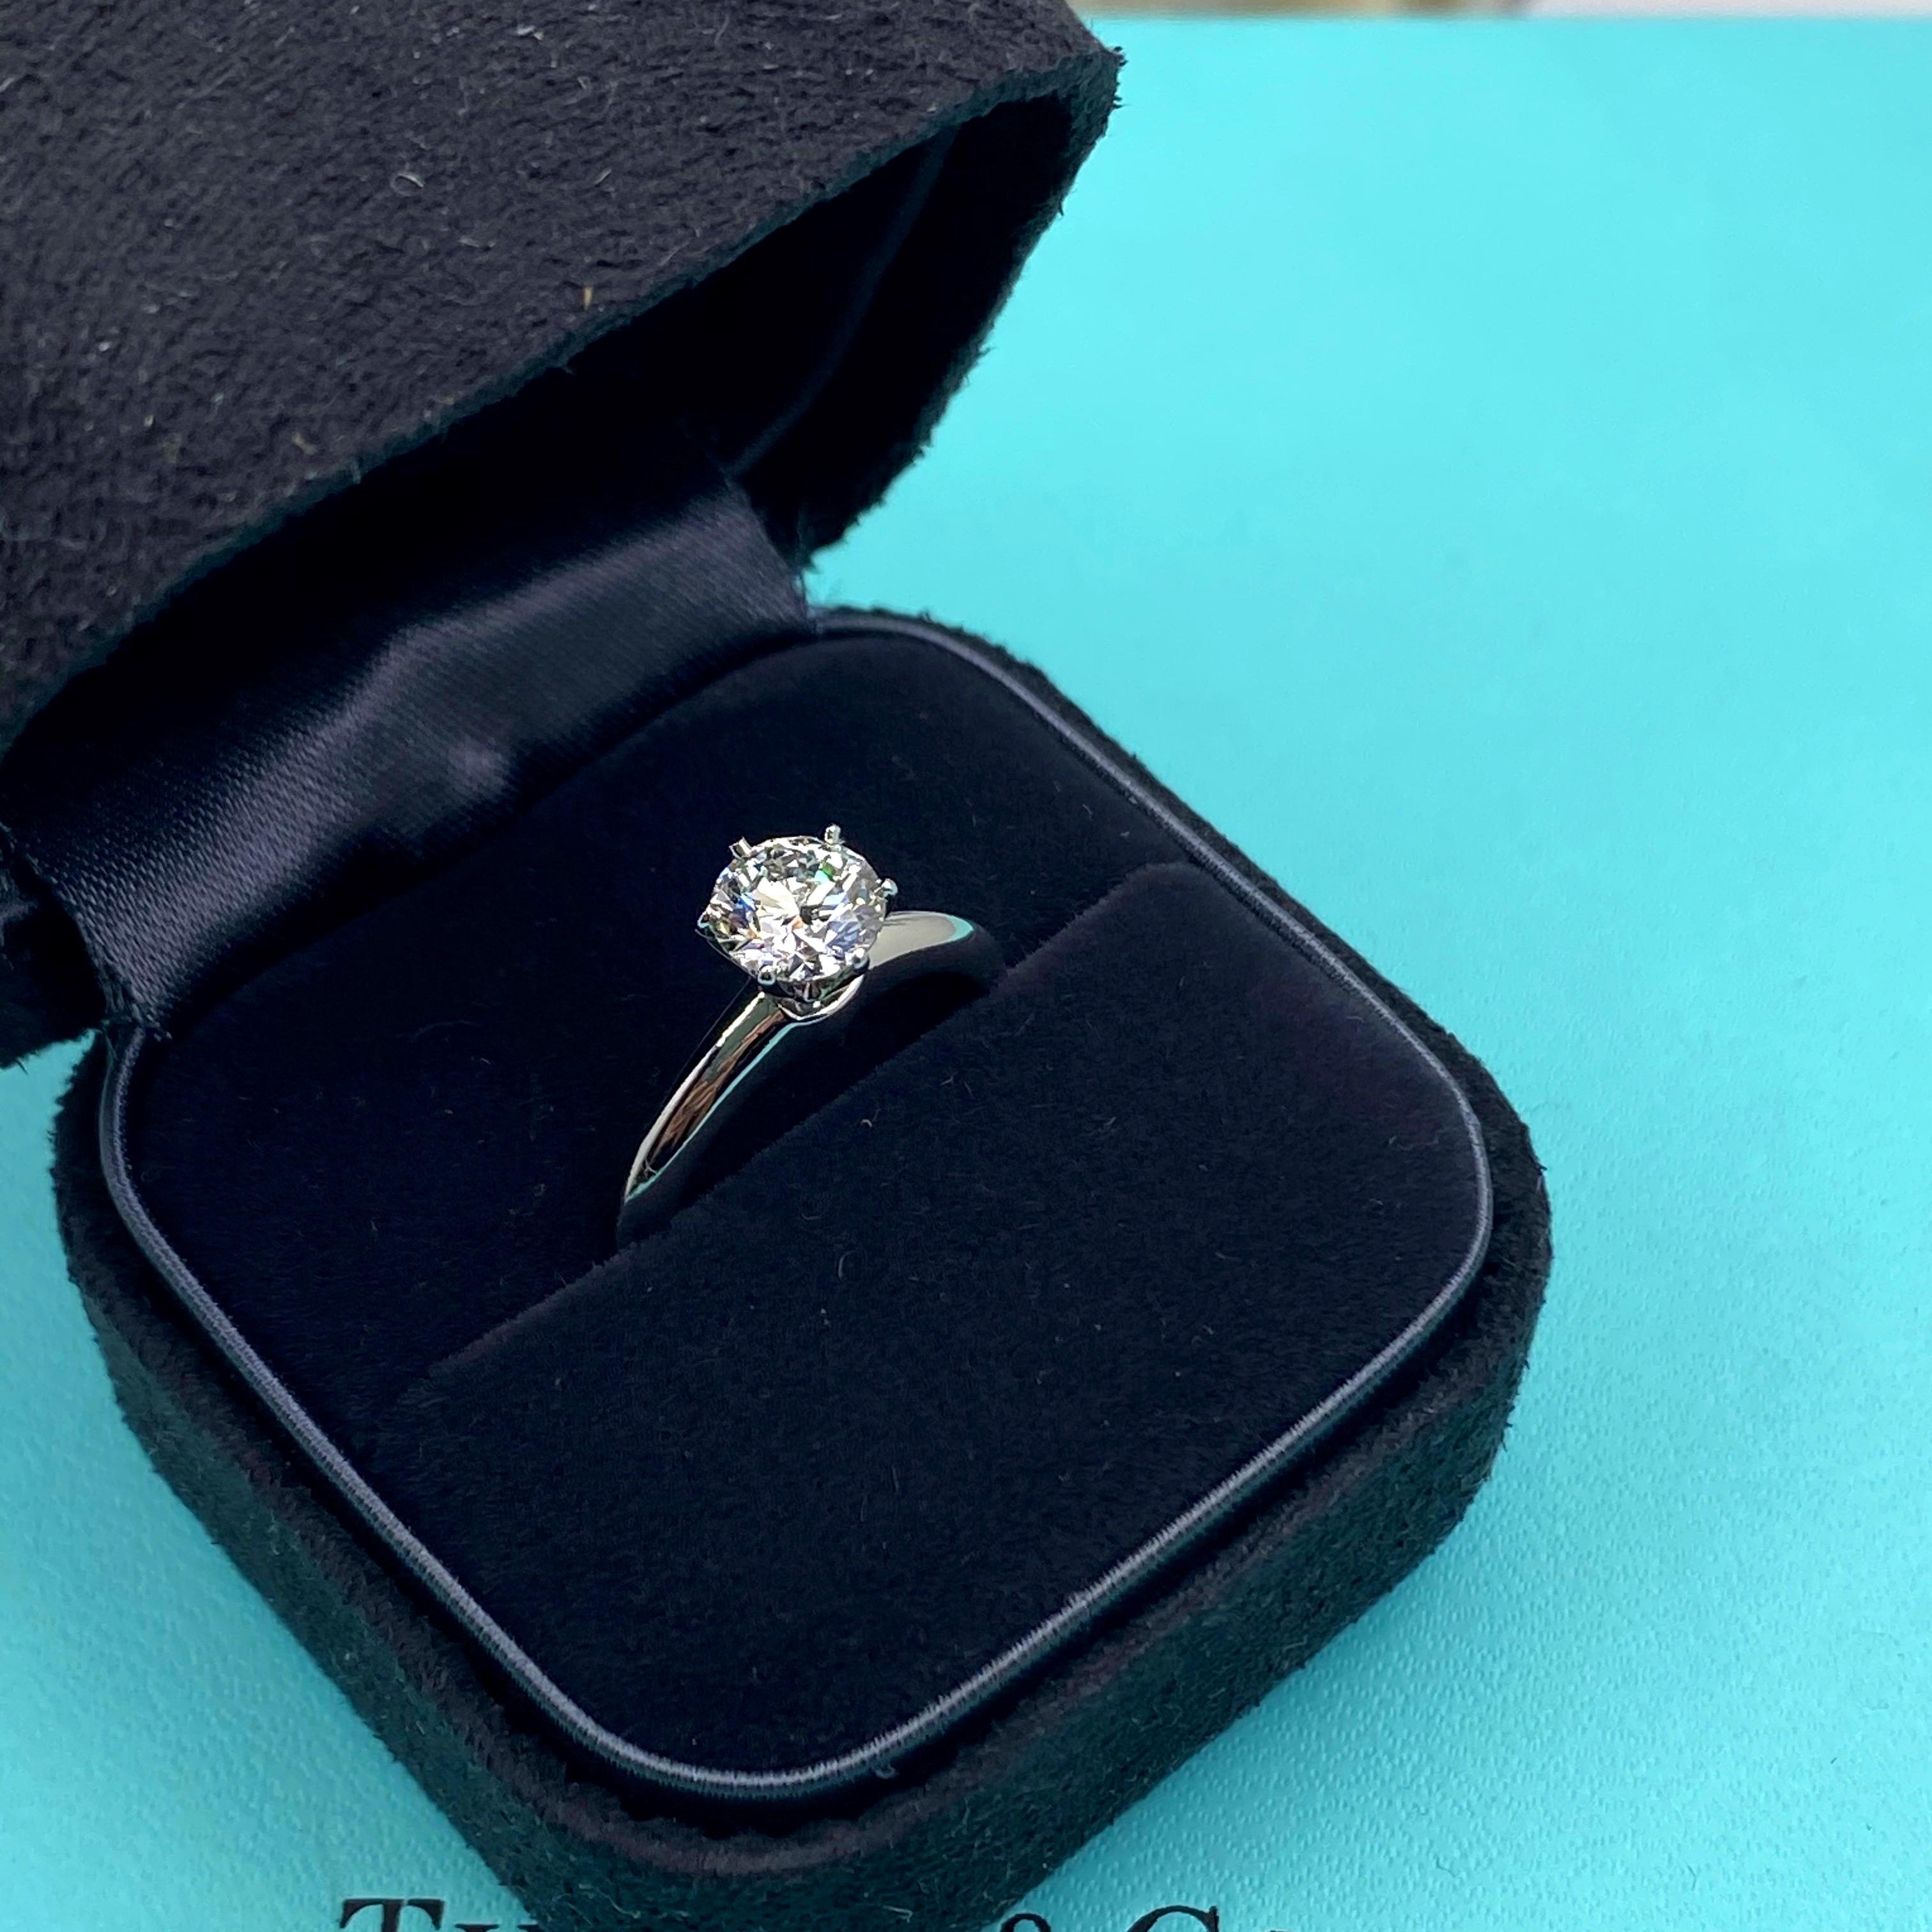 Tiffany & Co. Round Diamond 1.03 Carat G VS1 Solitaire Ring in Platinum For Sale 3